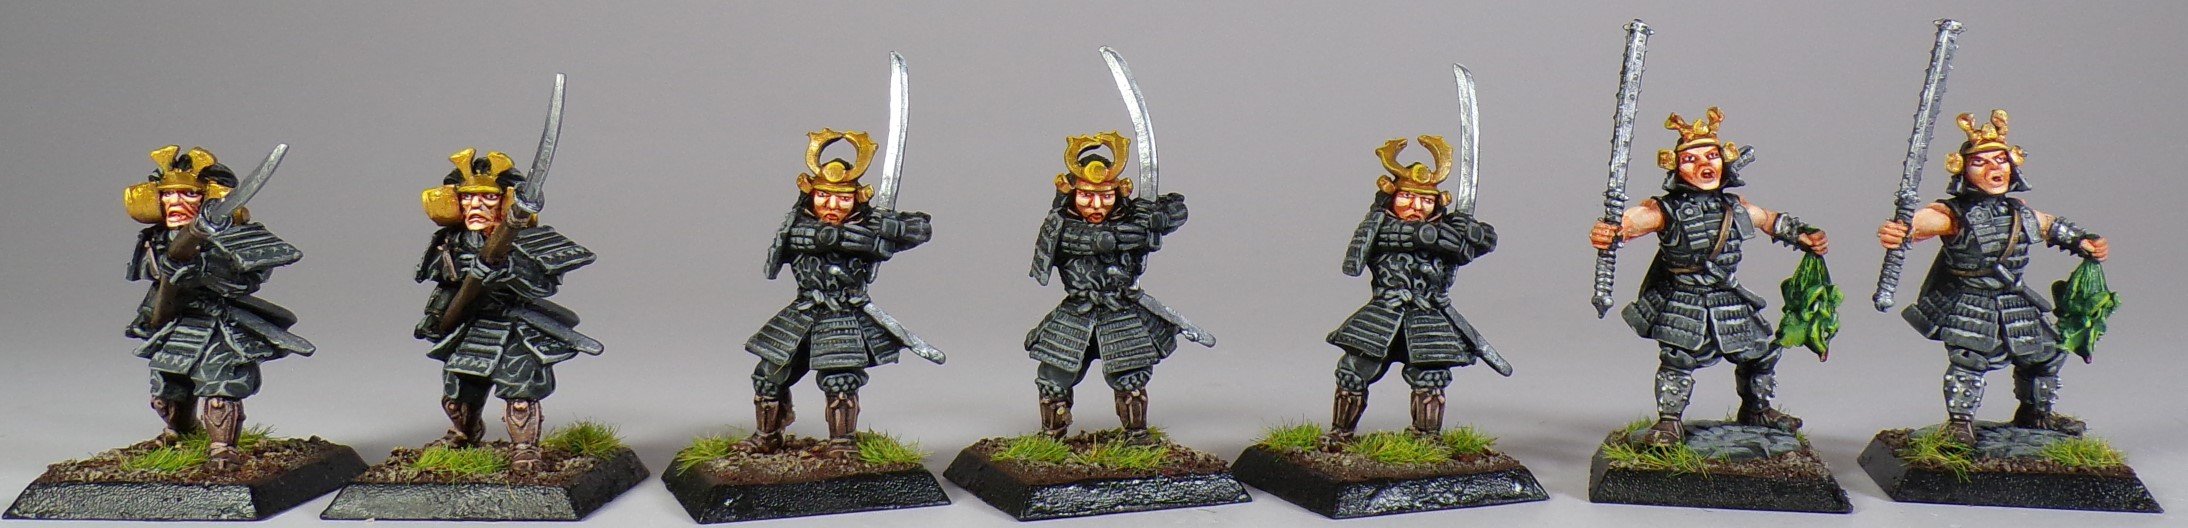 L5R Legend of the Five Rings Miniature Painting Service Paintedfigs (5).jpg